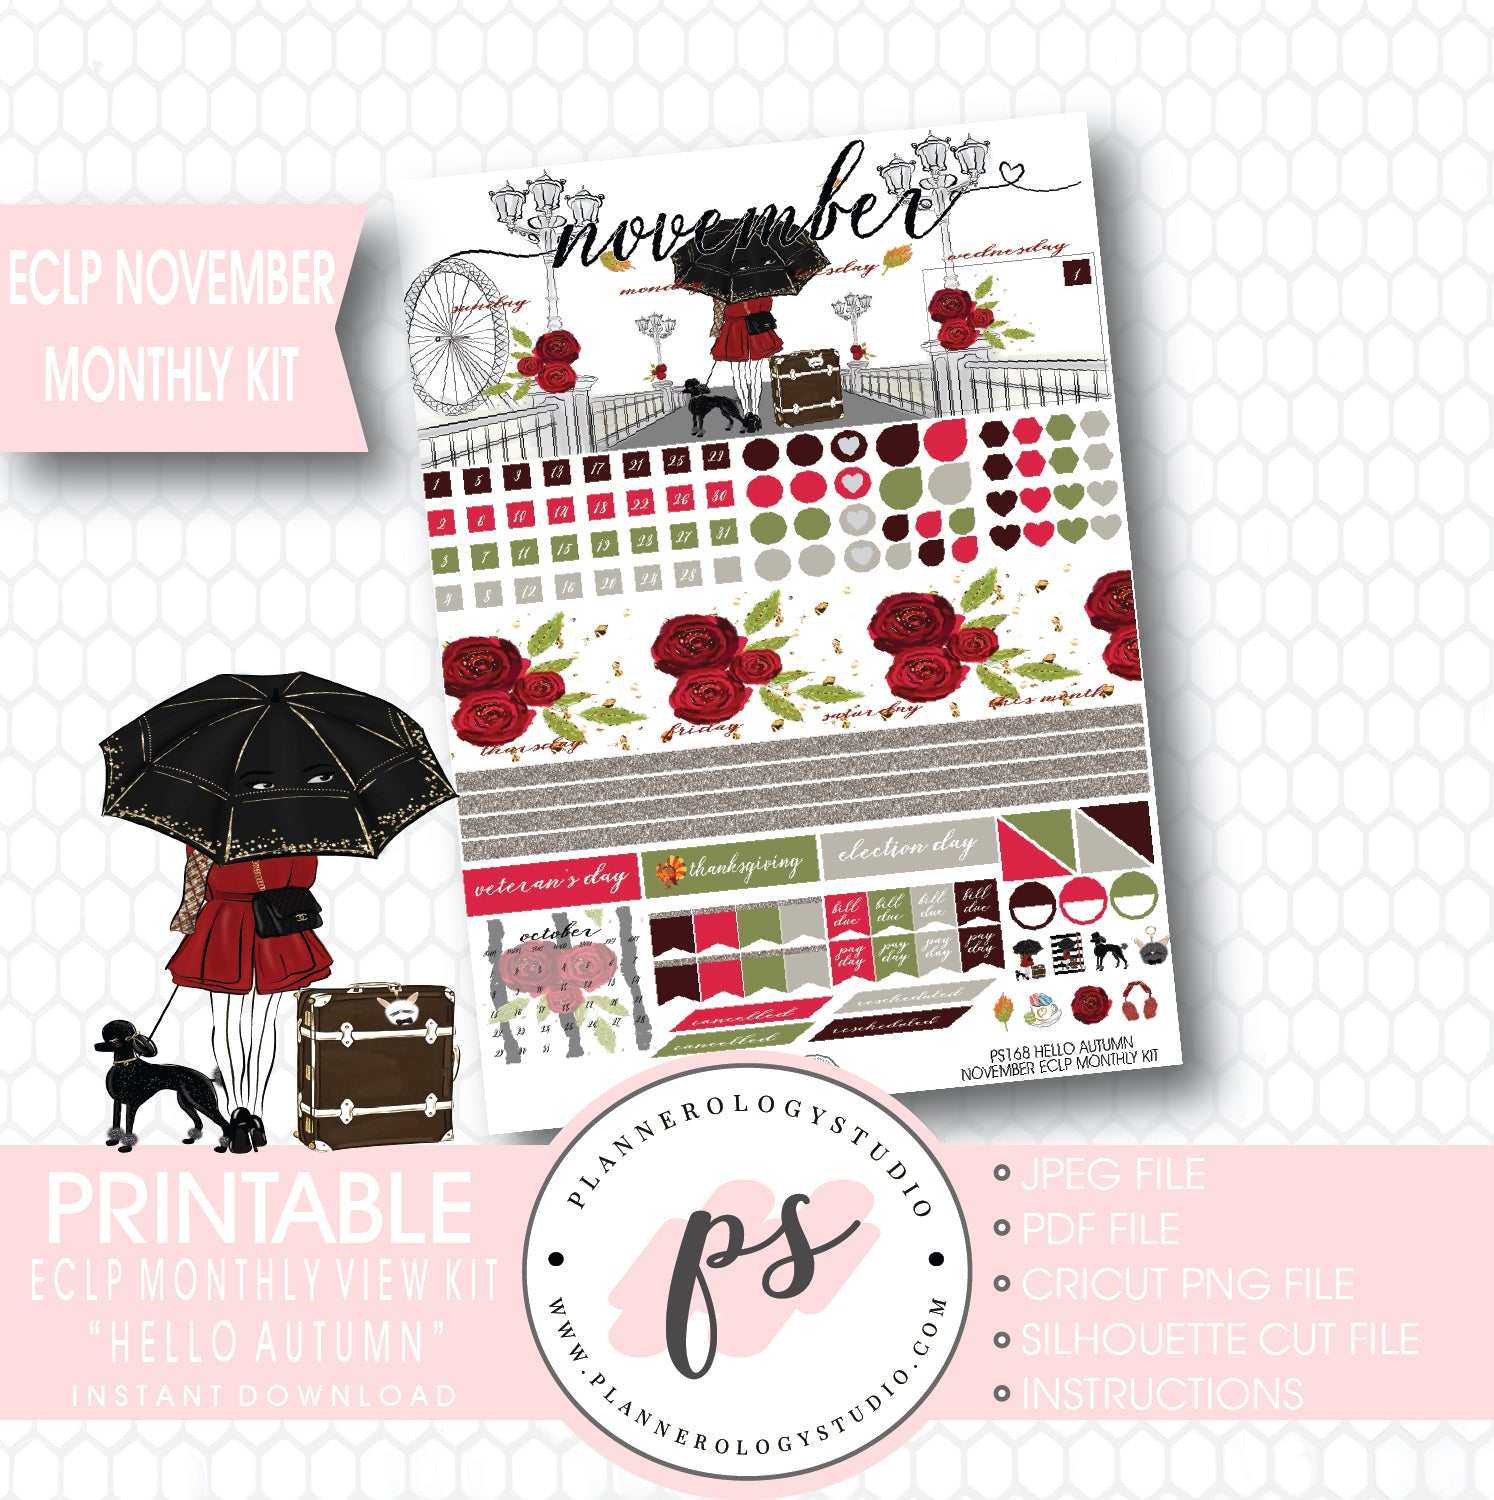 Hello Autumn (Fall) November 2017 Monthly View Kit Printable Planner Stickers (for use with ECLP) - Plannerologystudio